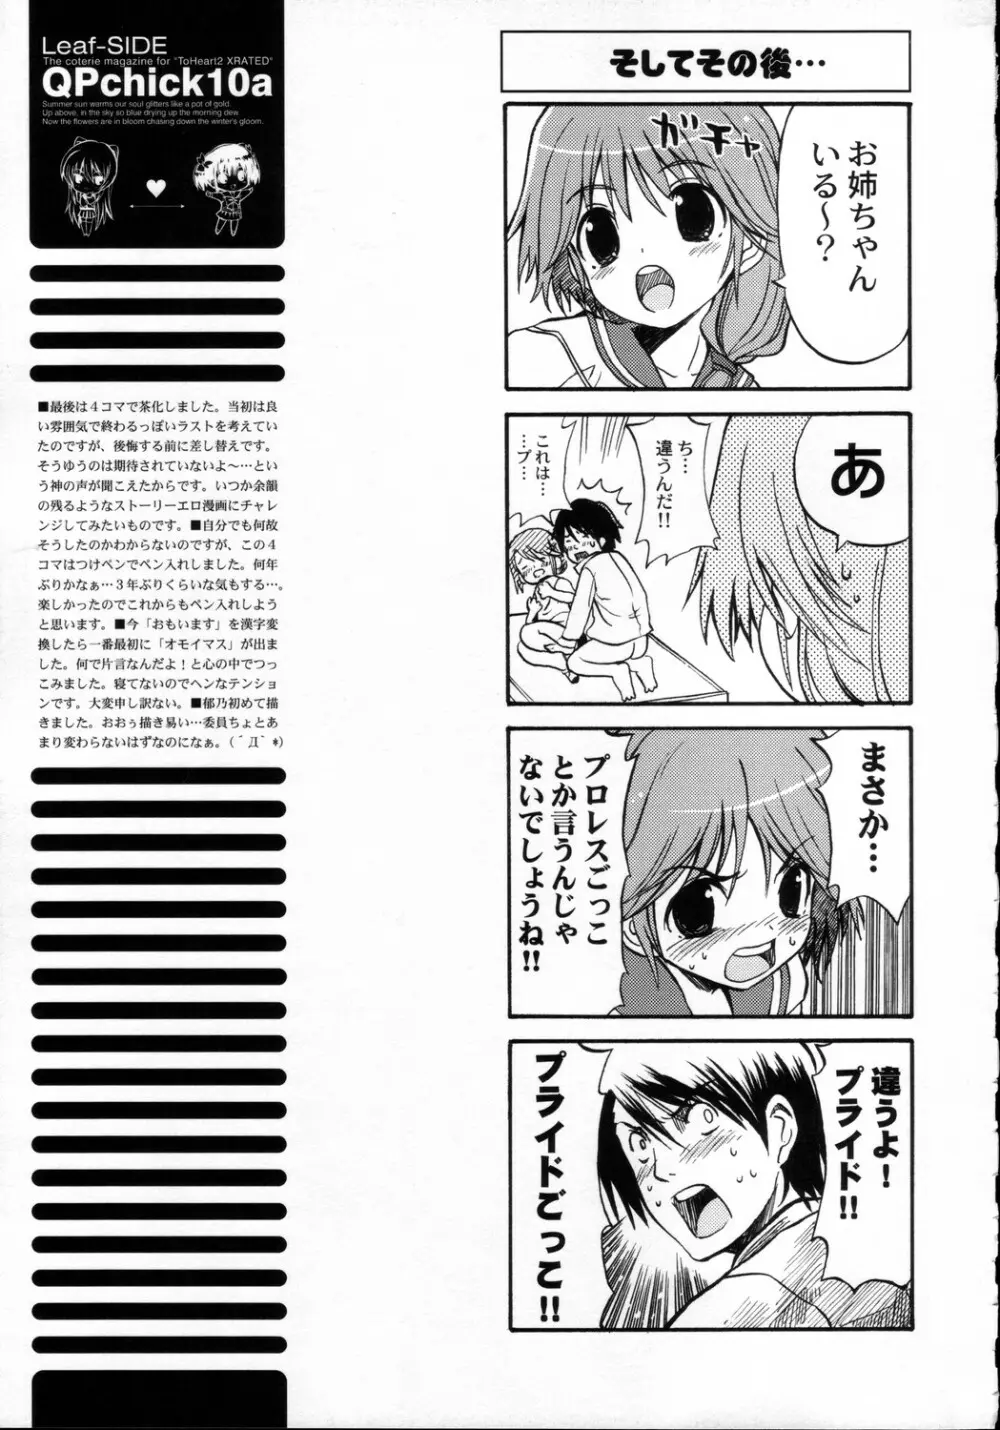 (C69) [QP：flapper (ピメコ, トメ太)] QPchick10a Leaf-SIDE -Re:Re:CHERRY- (トゥハート2) Page.42